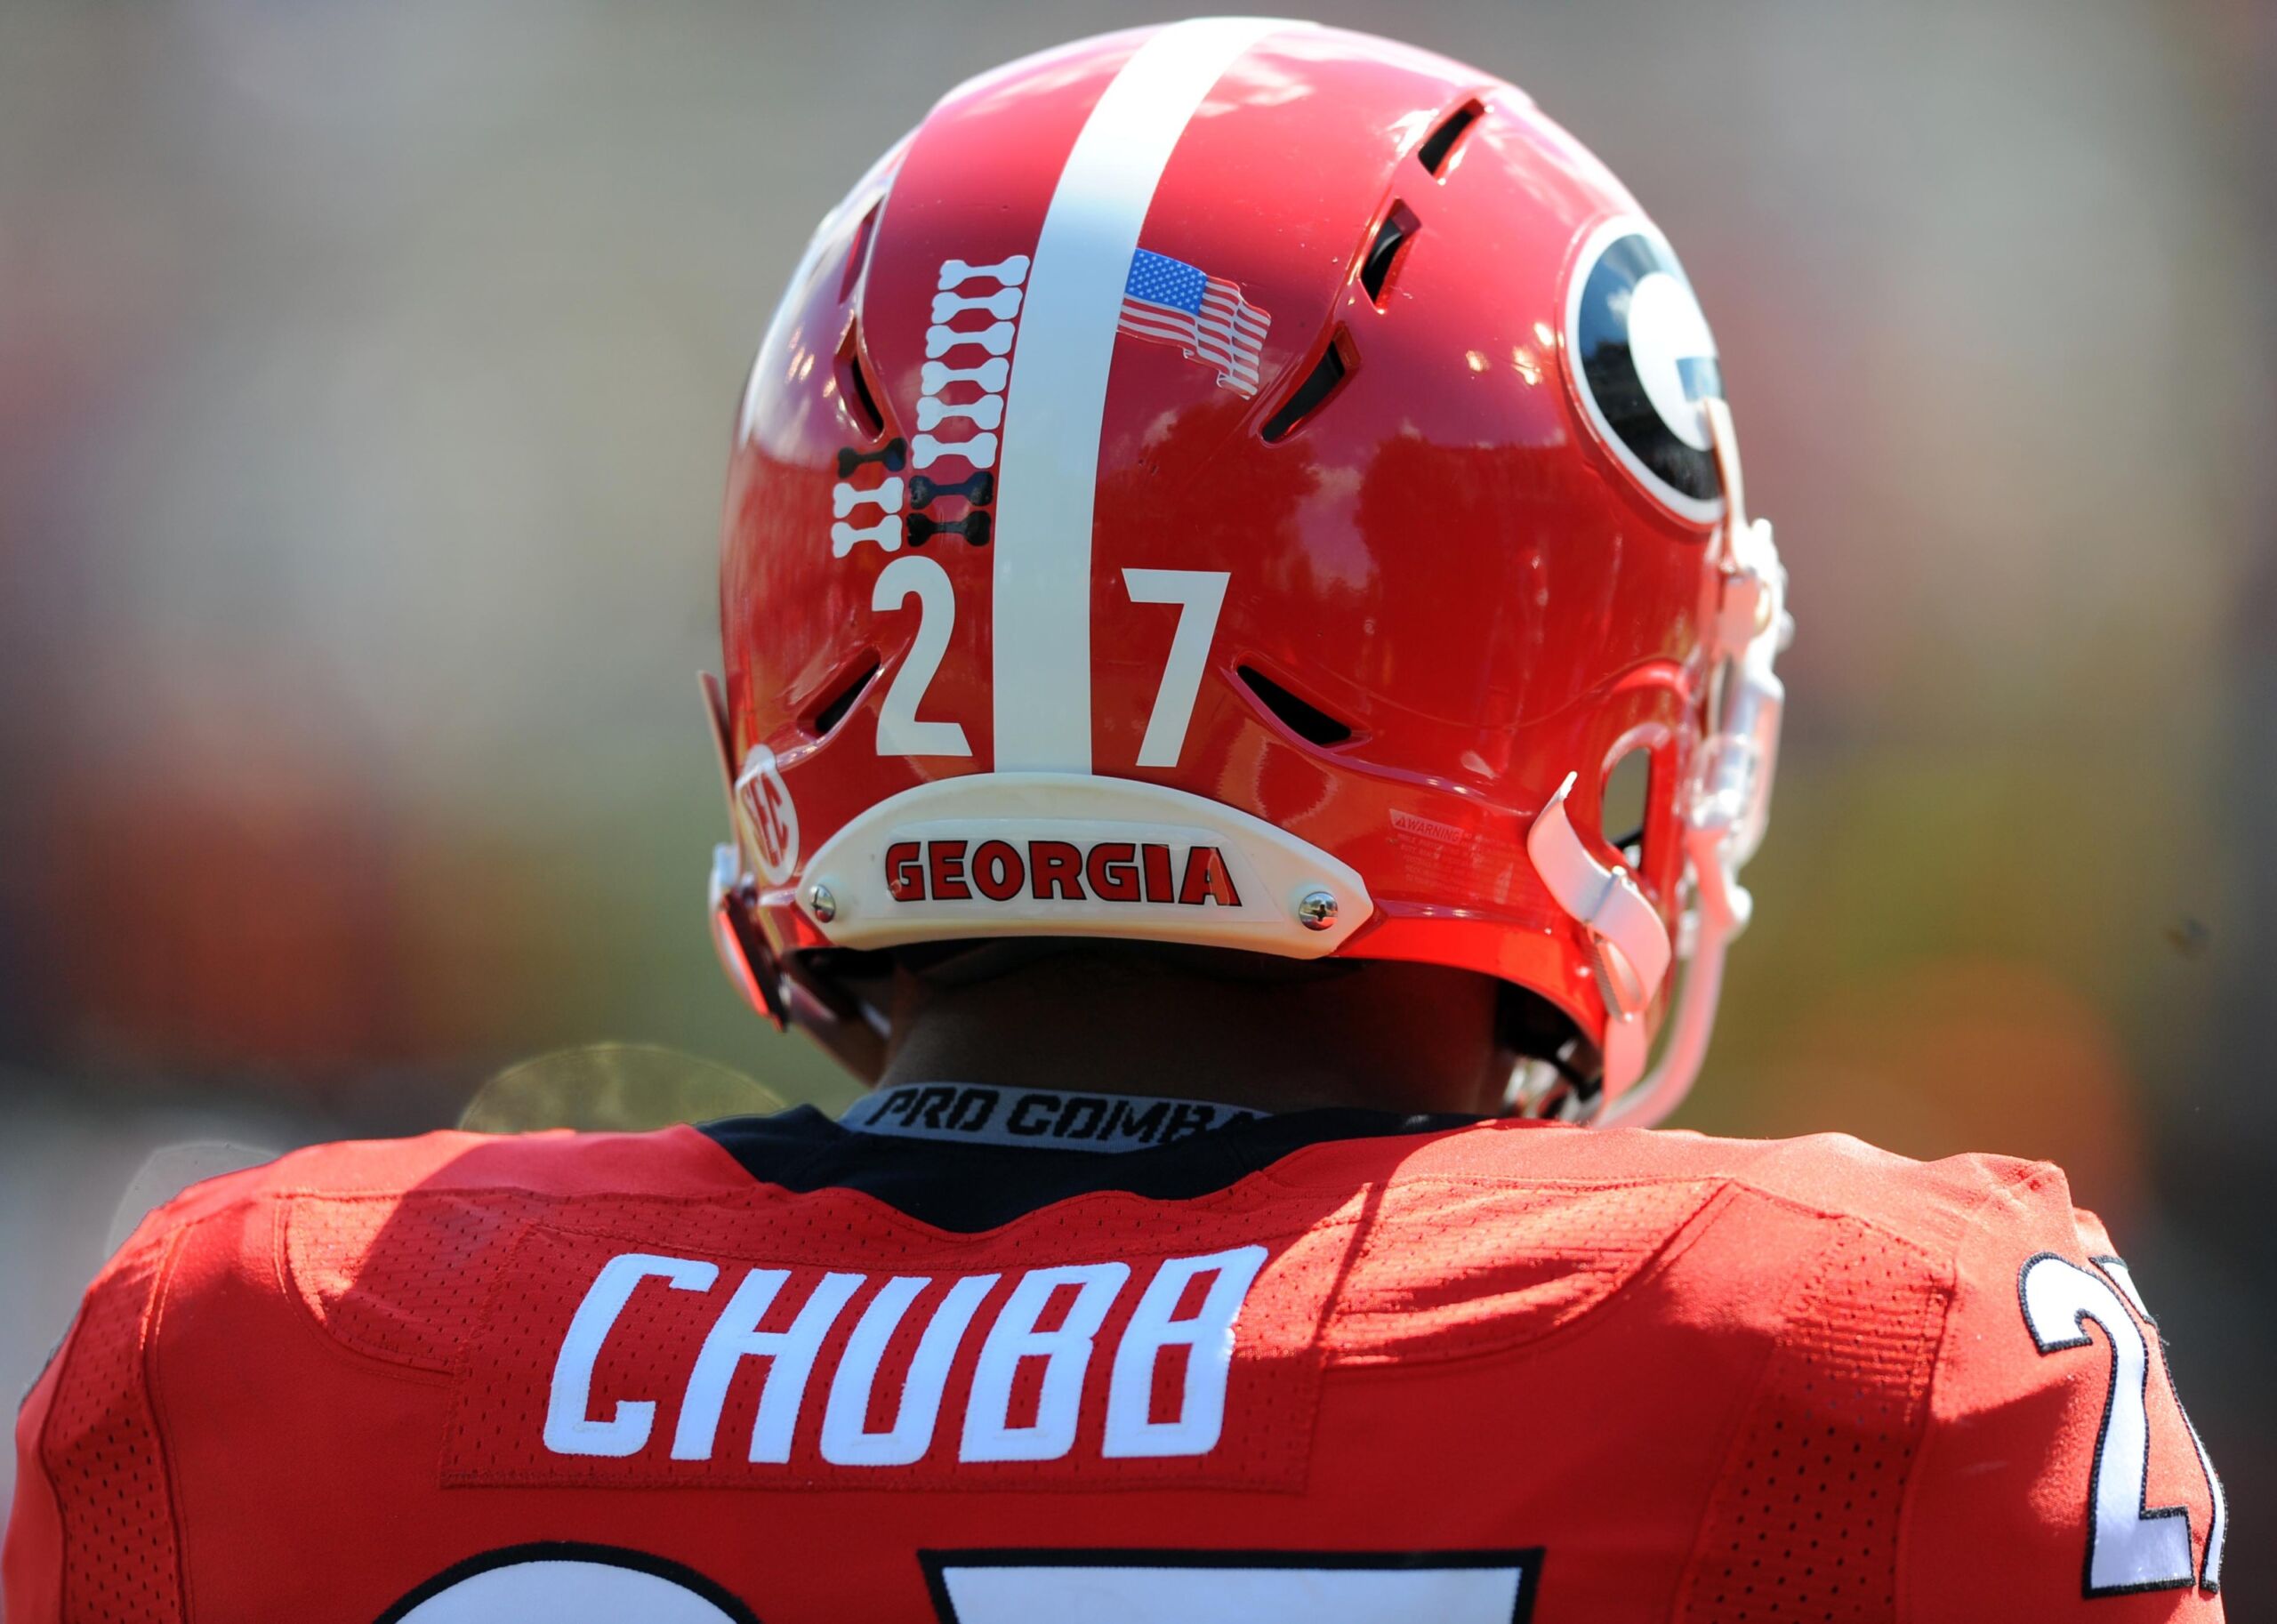 Nick Chubb is America's running back, and he will return